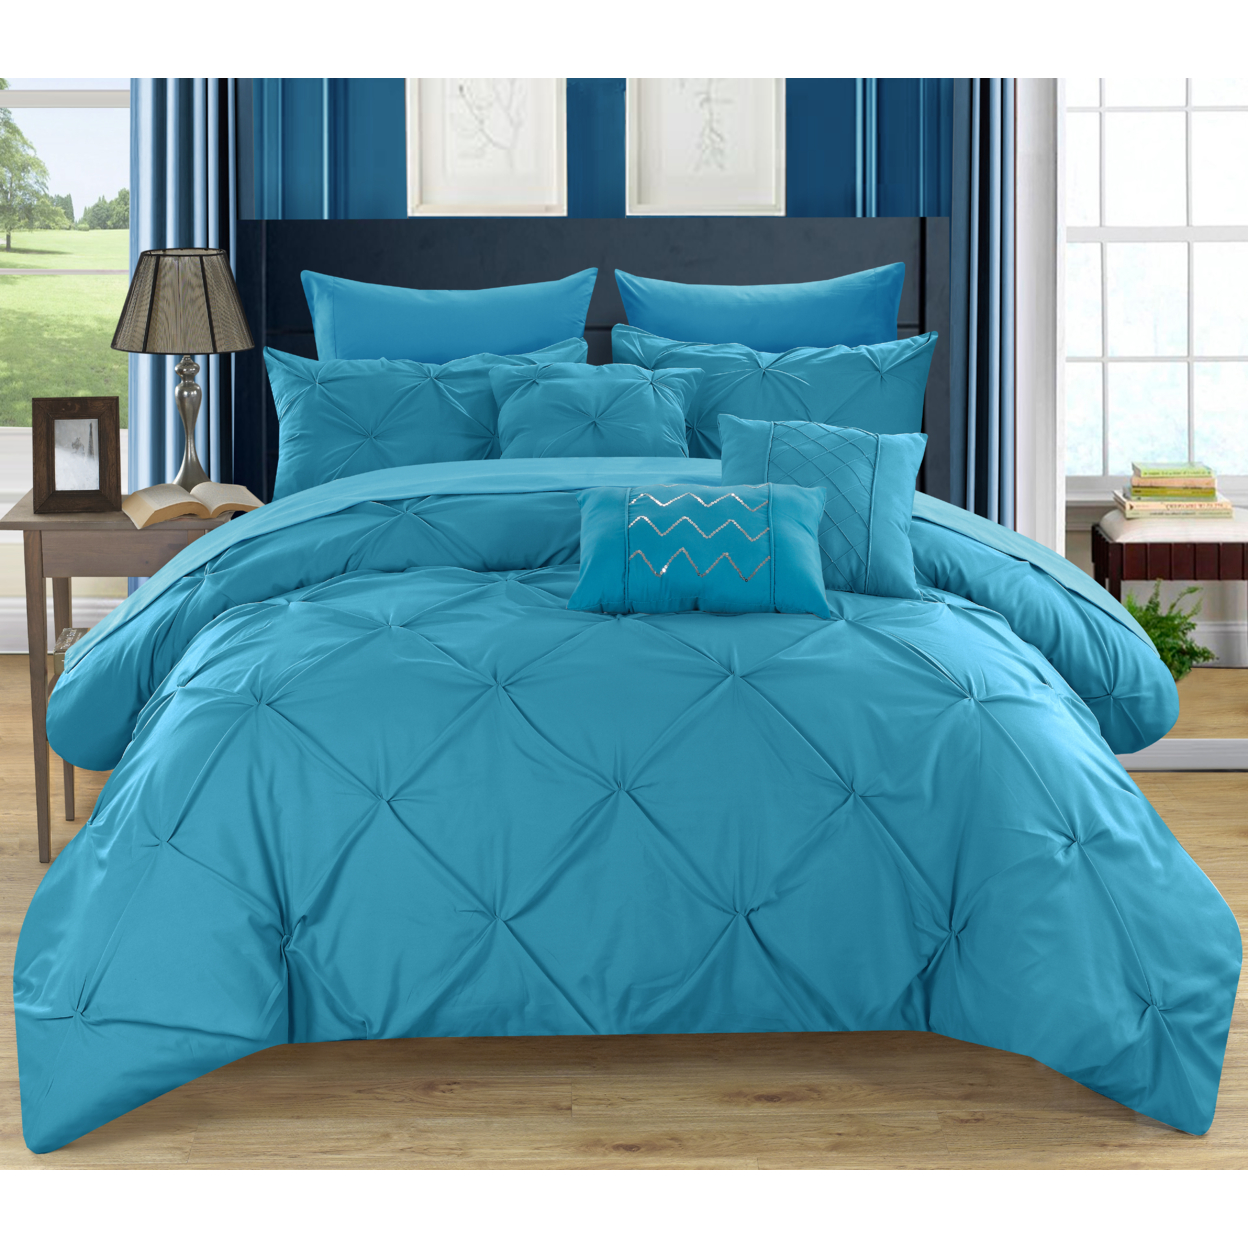 Alvatore Pinch Pleated Bed In A Bag Comforter Set - Blue, King